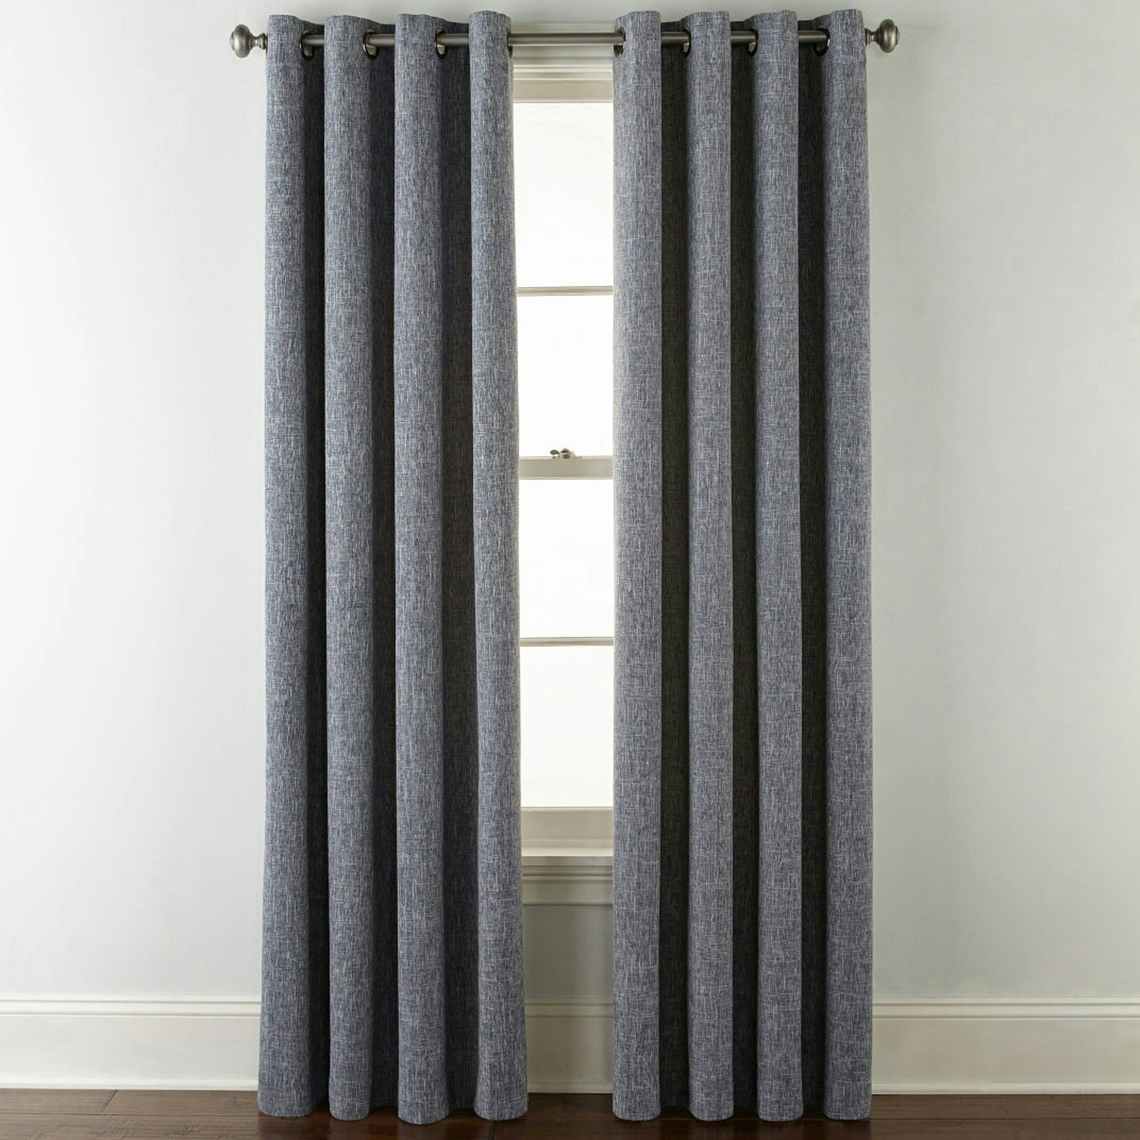 Gray blackout curtains